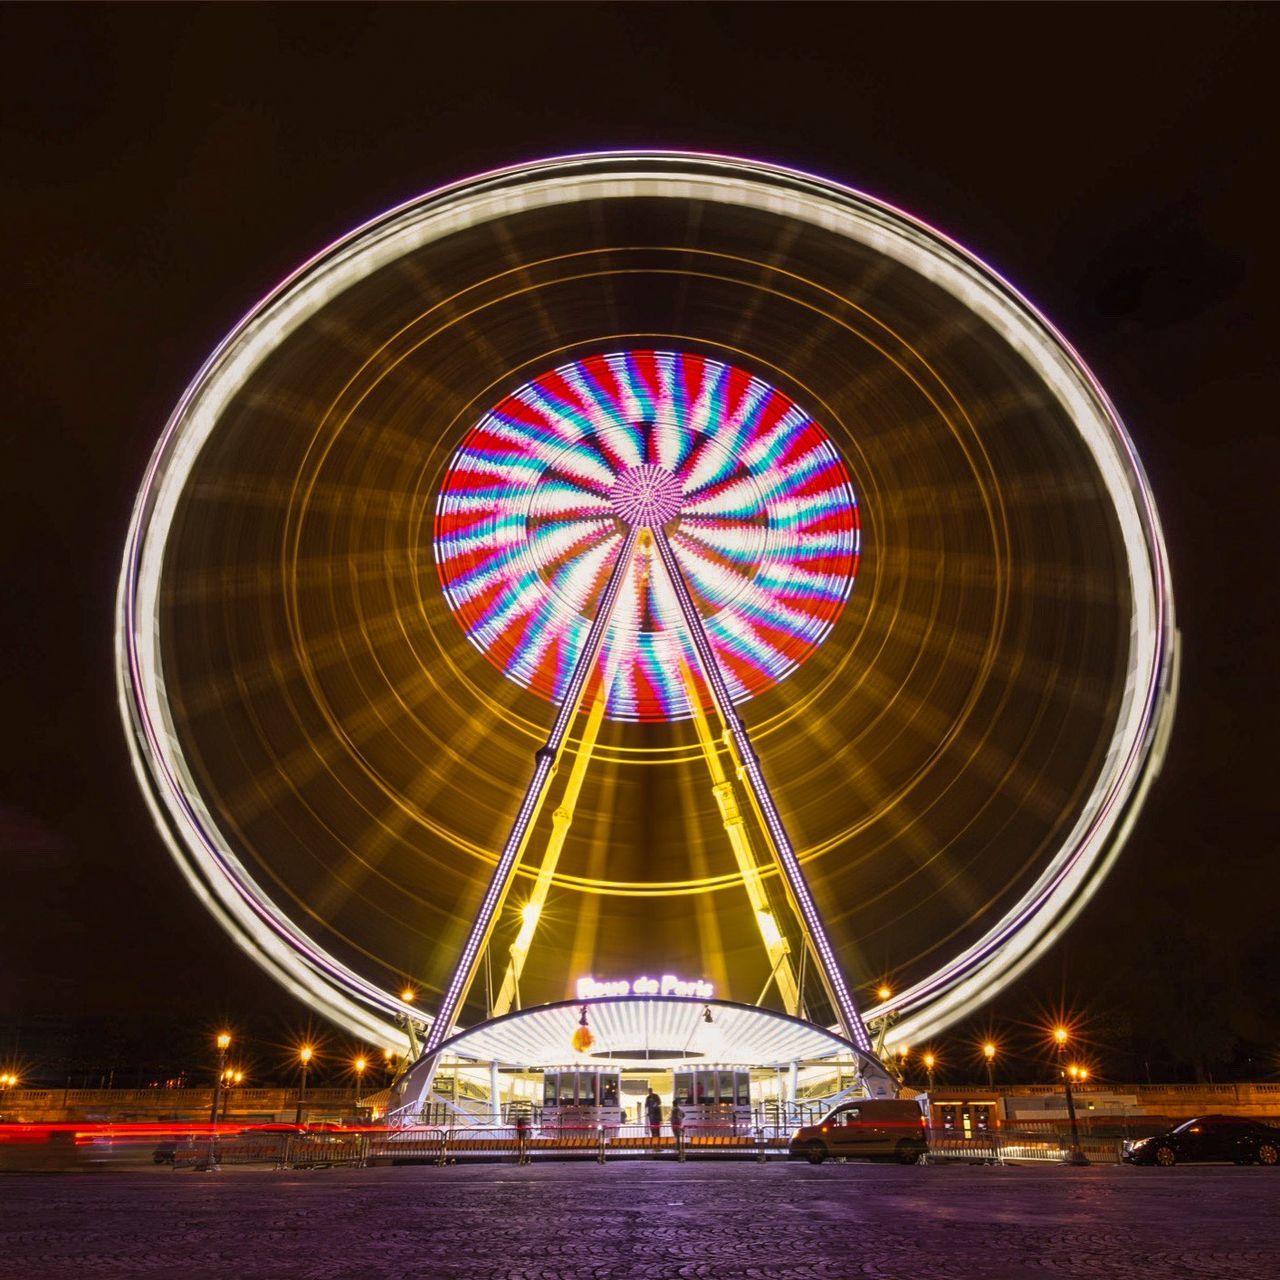 illuminated, night, arts culture and entertainment, ferris wheel, amusement park, amusement park ride, circle, multi colored, built structure, architecture, lighting equipment, low angle view, motion, sky, glowing, long exposure, outdoors, geometric shape, no people, pattern